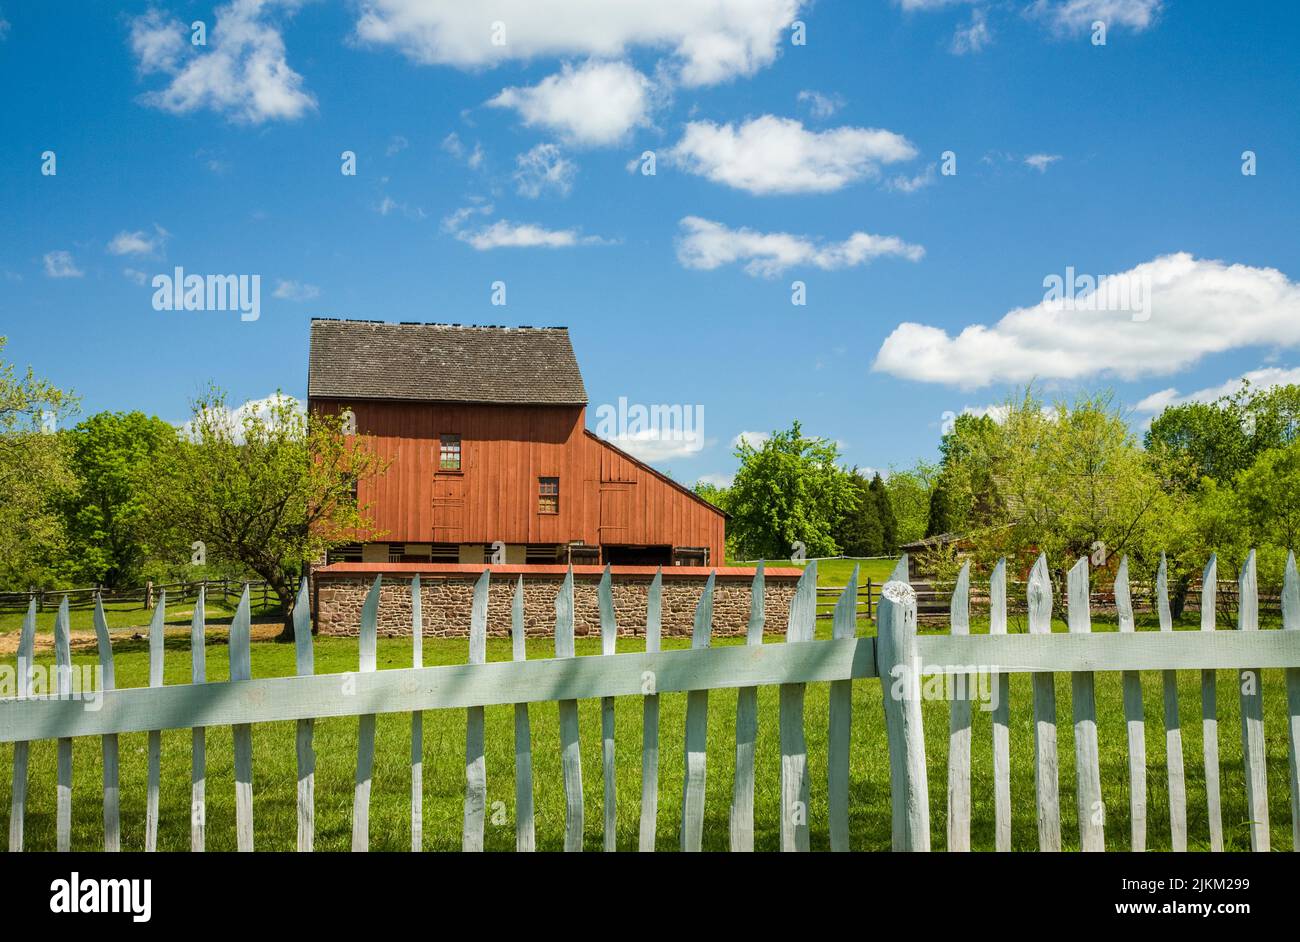 Daniel Boone Homestead Red Barn and Fence, Berks County, Pennsylvania, USA PA Images US old vintage Farming Frontiersman Stockfoto